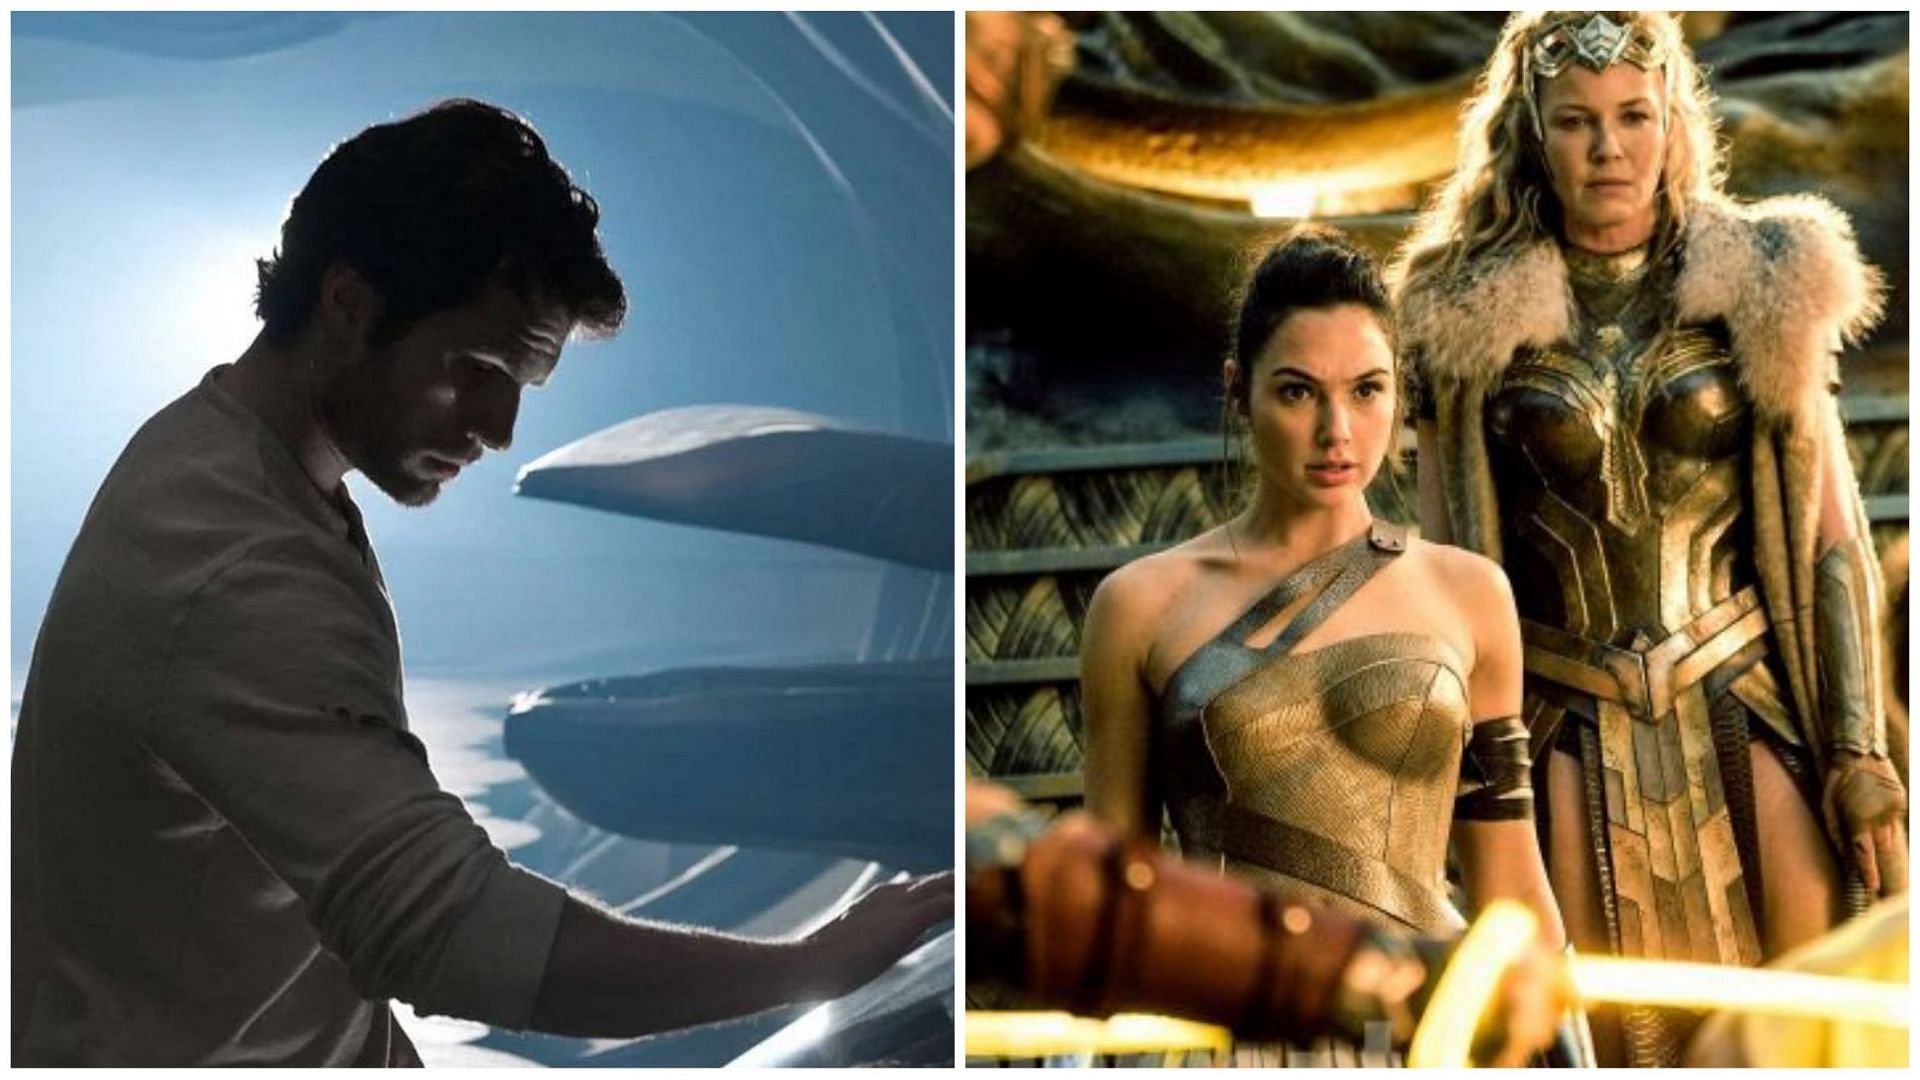 Stills from Man of Steel and Wonder Woman (Images via Warner Bros Pictures)